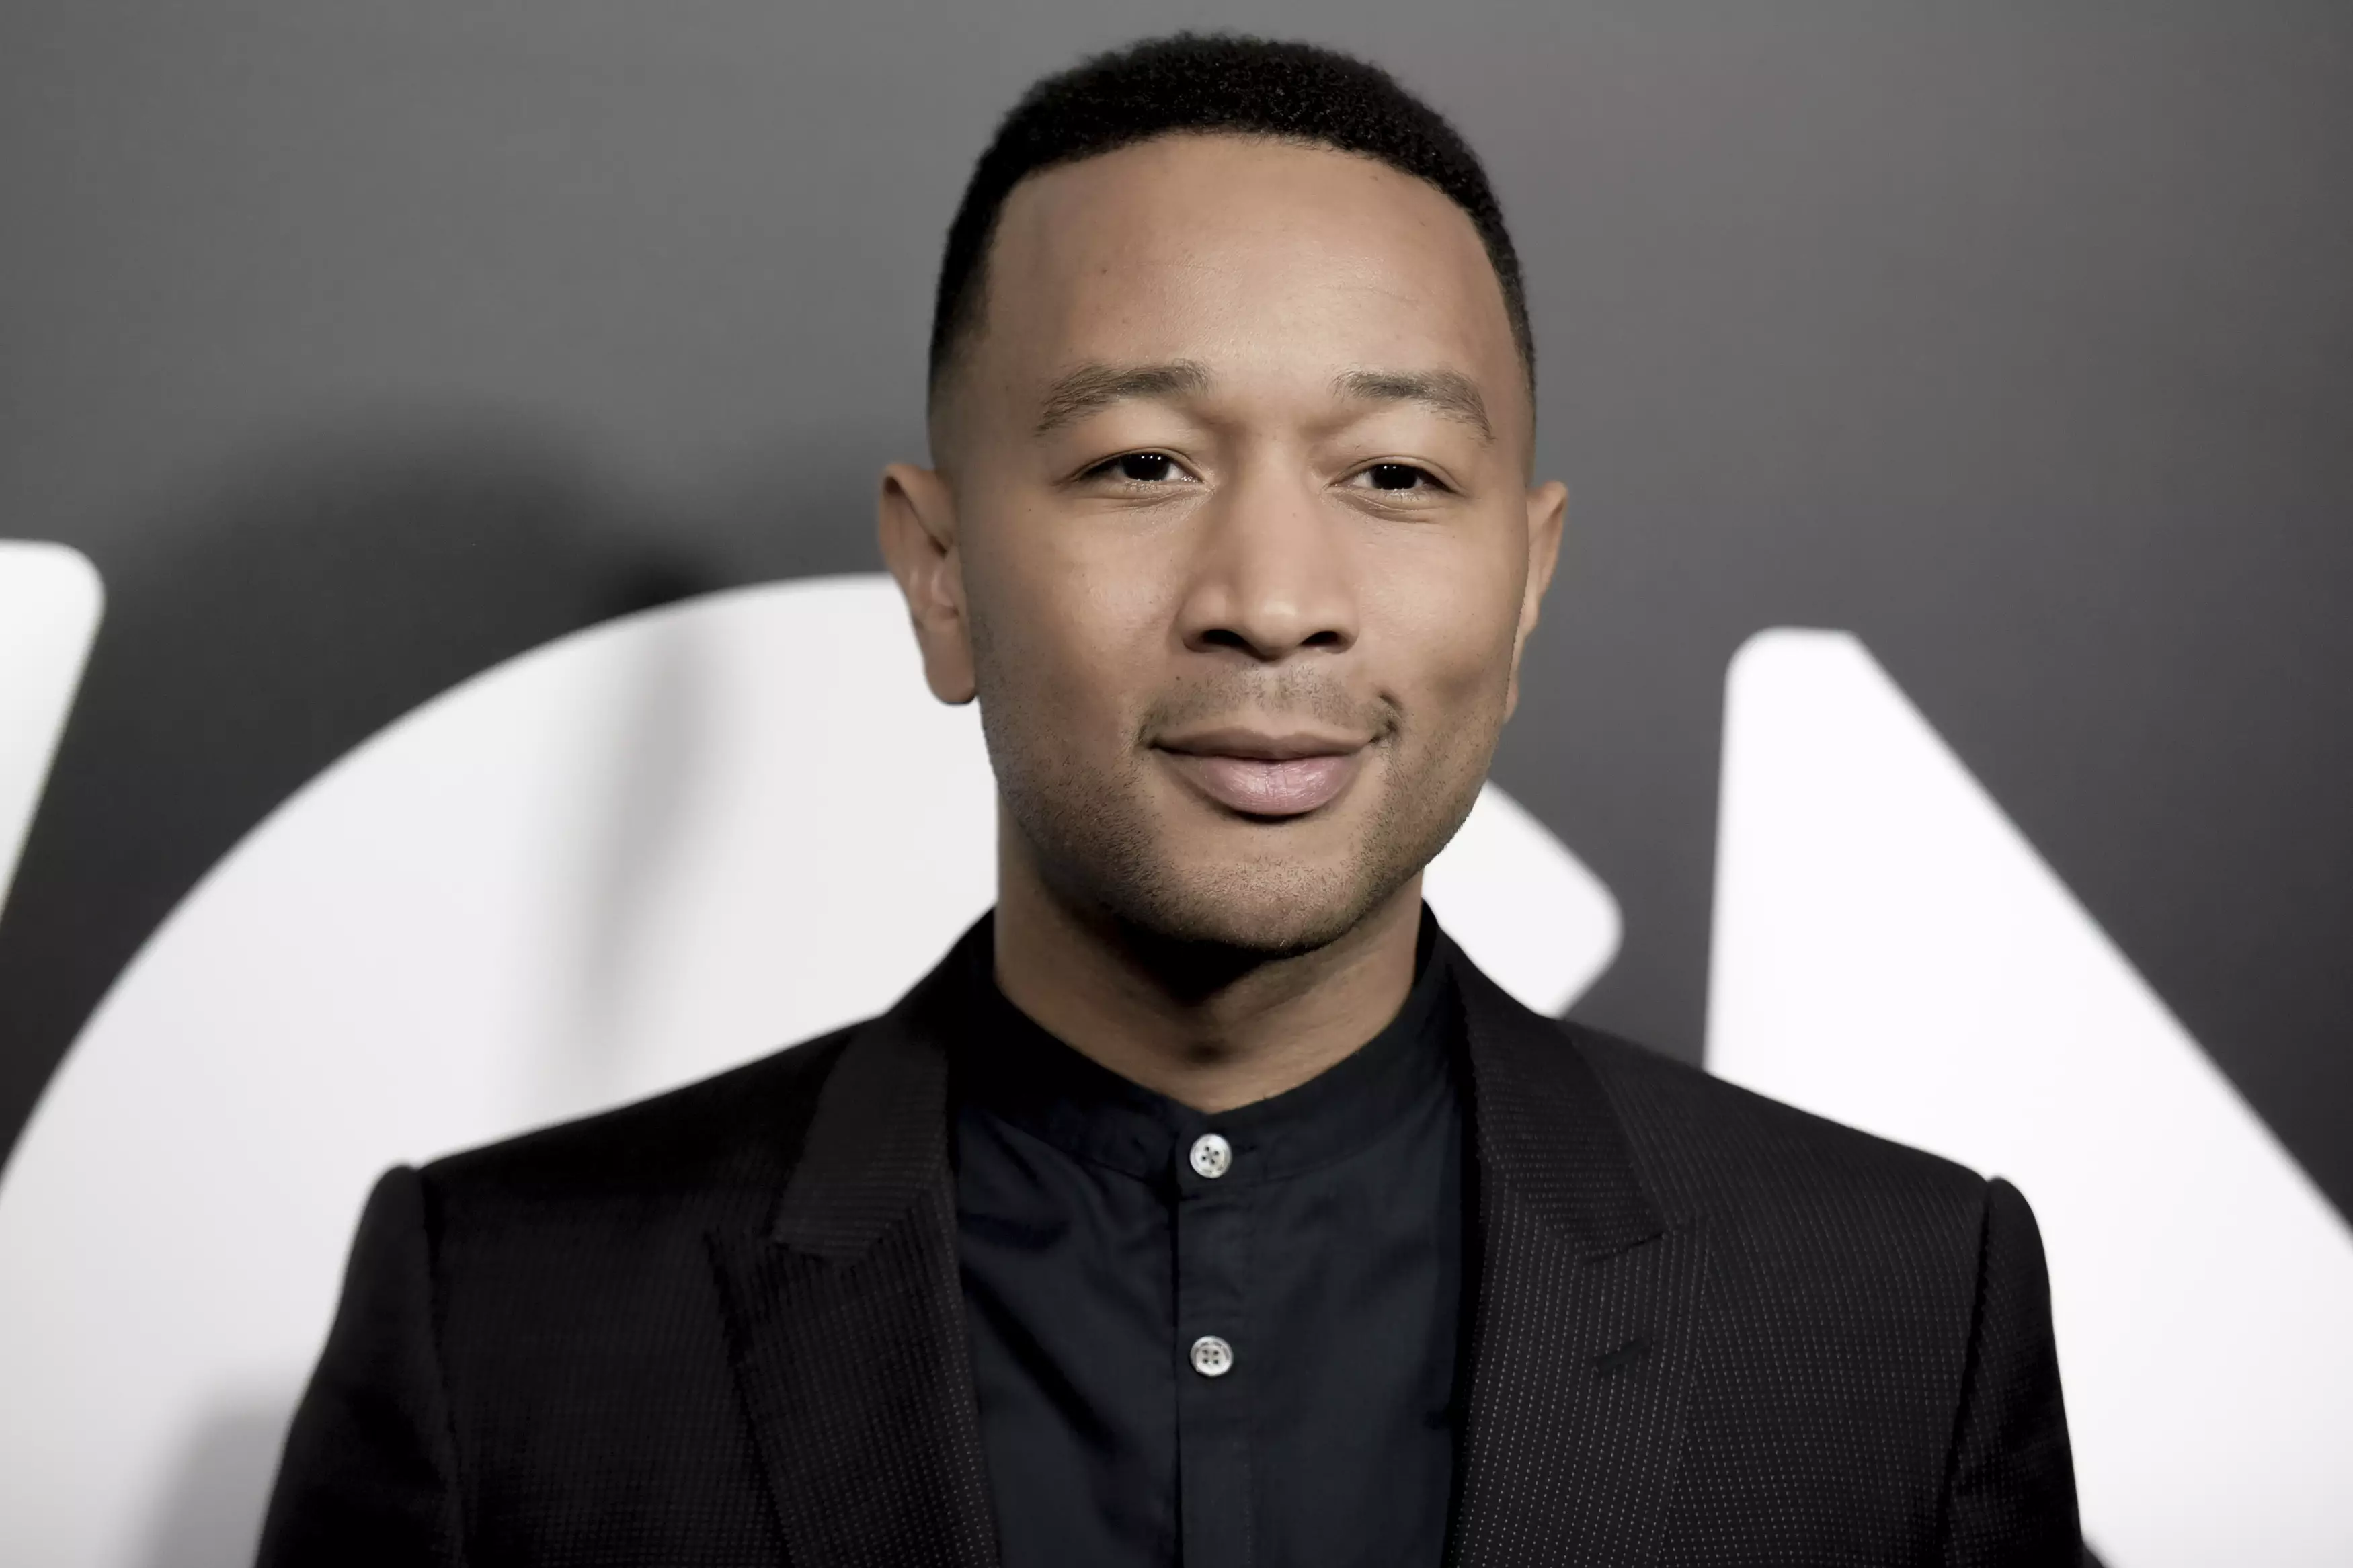 John Legend Speaks Out About President Trump's 'Muslim Ban'